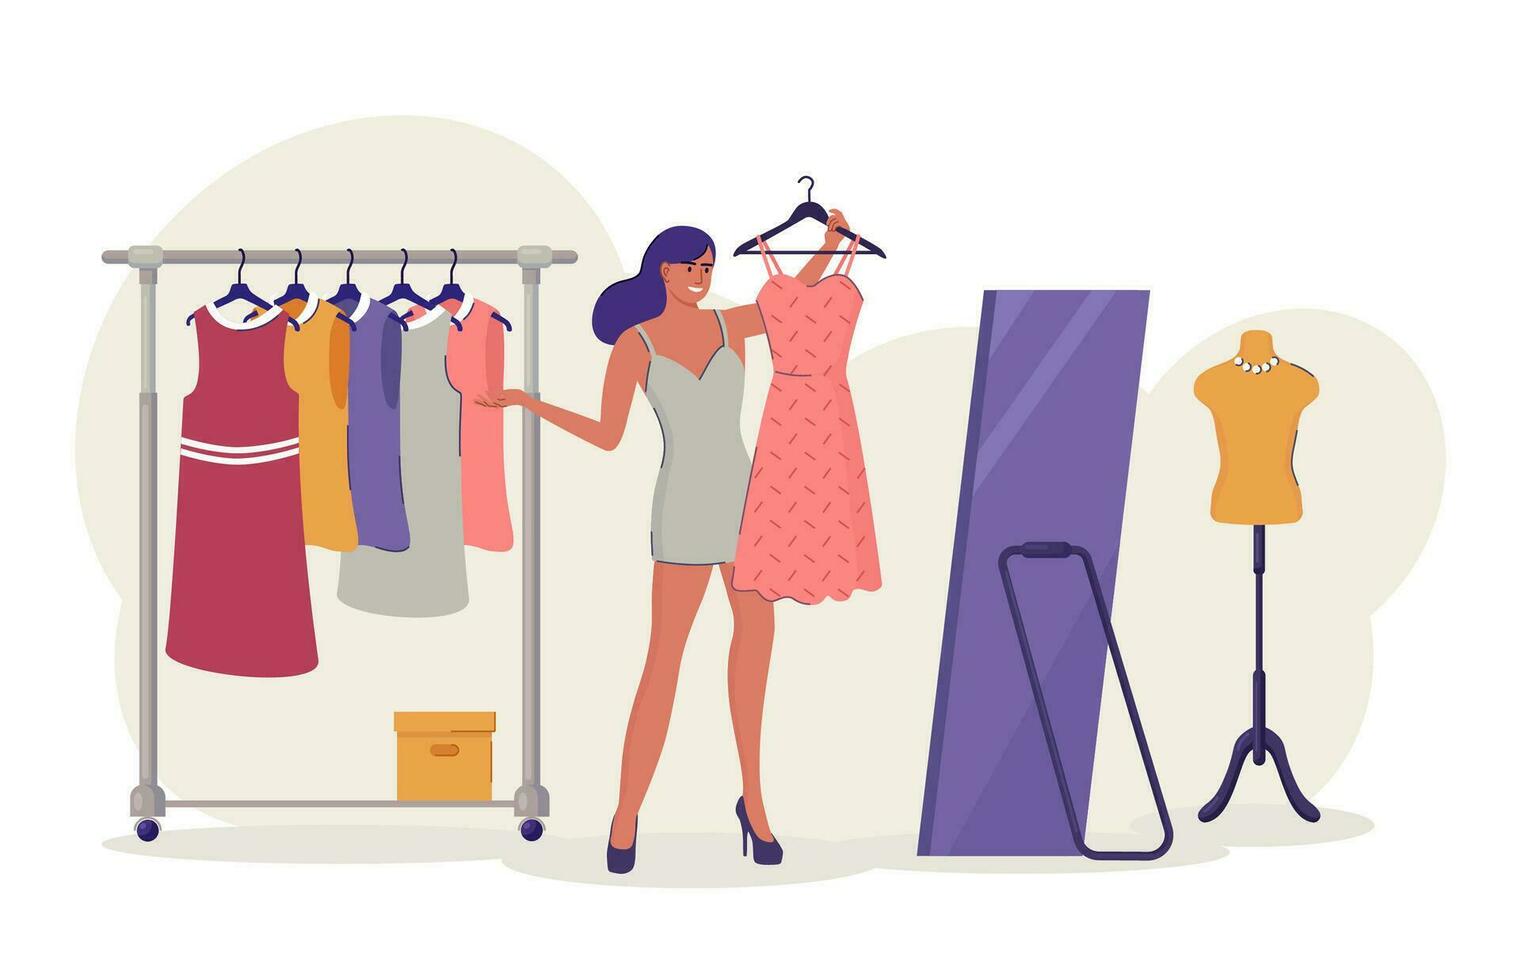 Woman is trying on a new dress in the store. Shopping concept. Girl standing near mirror and rack with hangers. Vector illustration